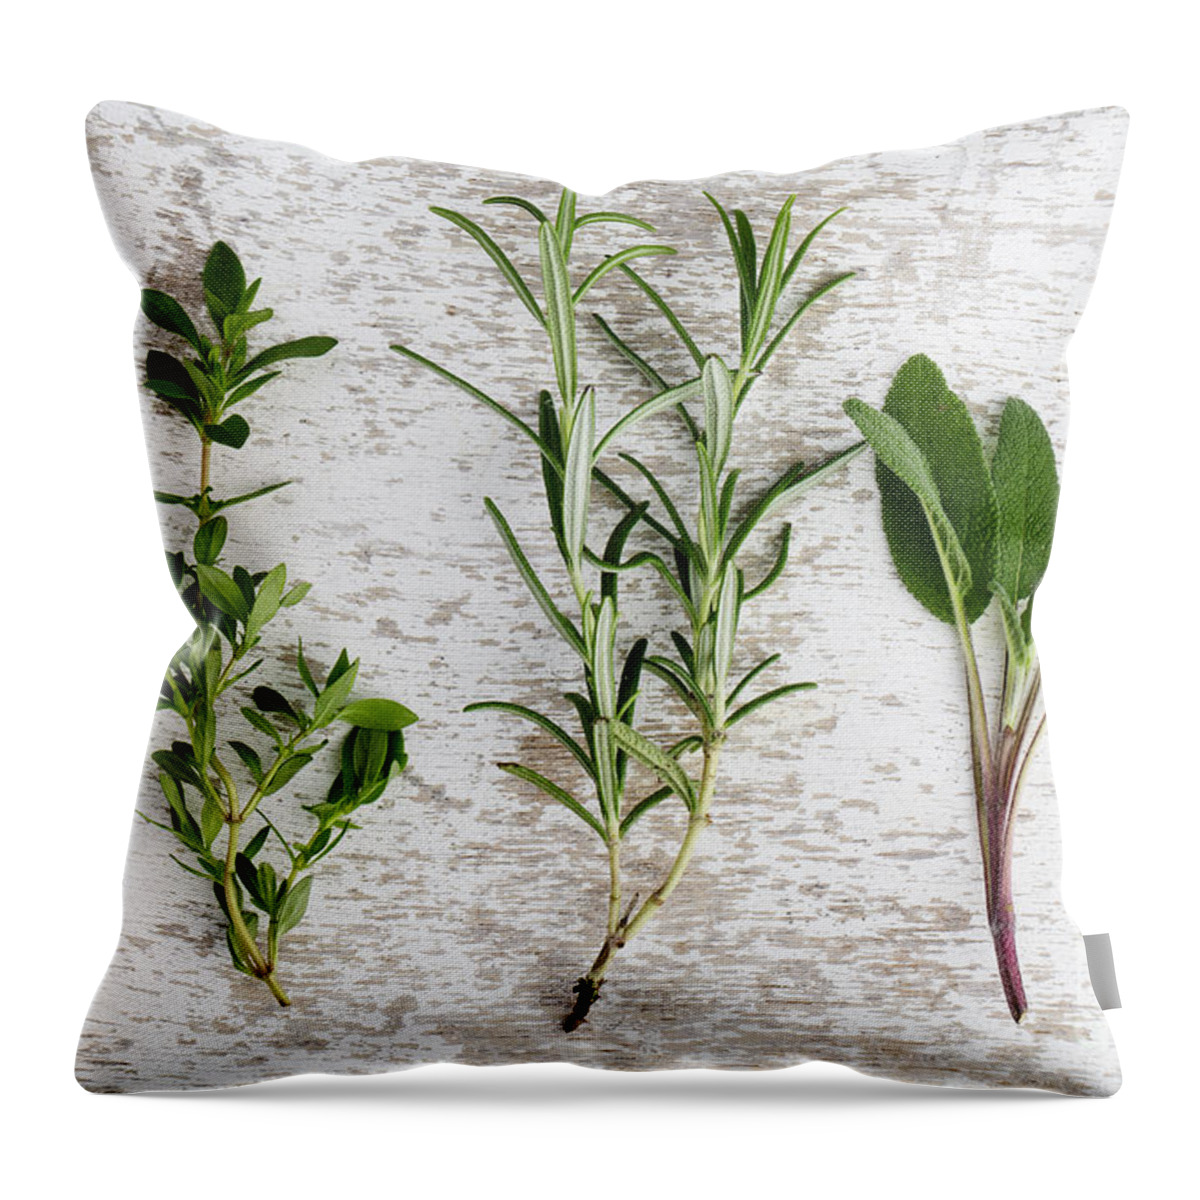 Rosemary Throw Pillow featuring the photograph Fresh Herbs by Nailia Schwarz